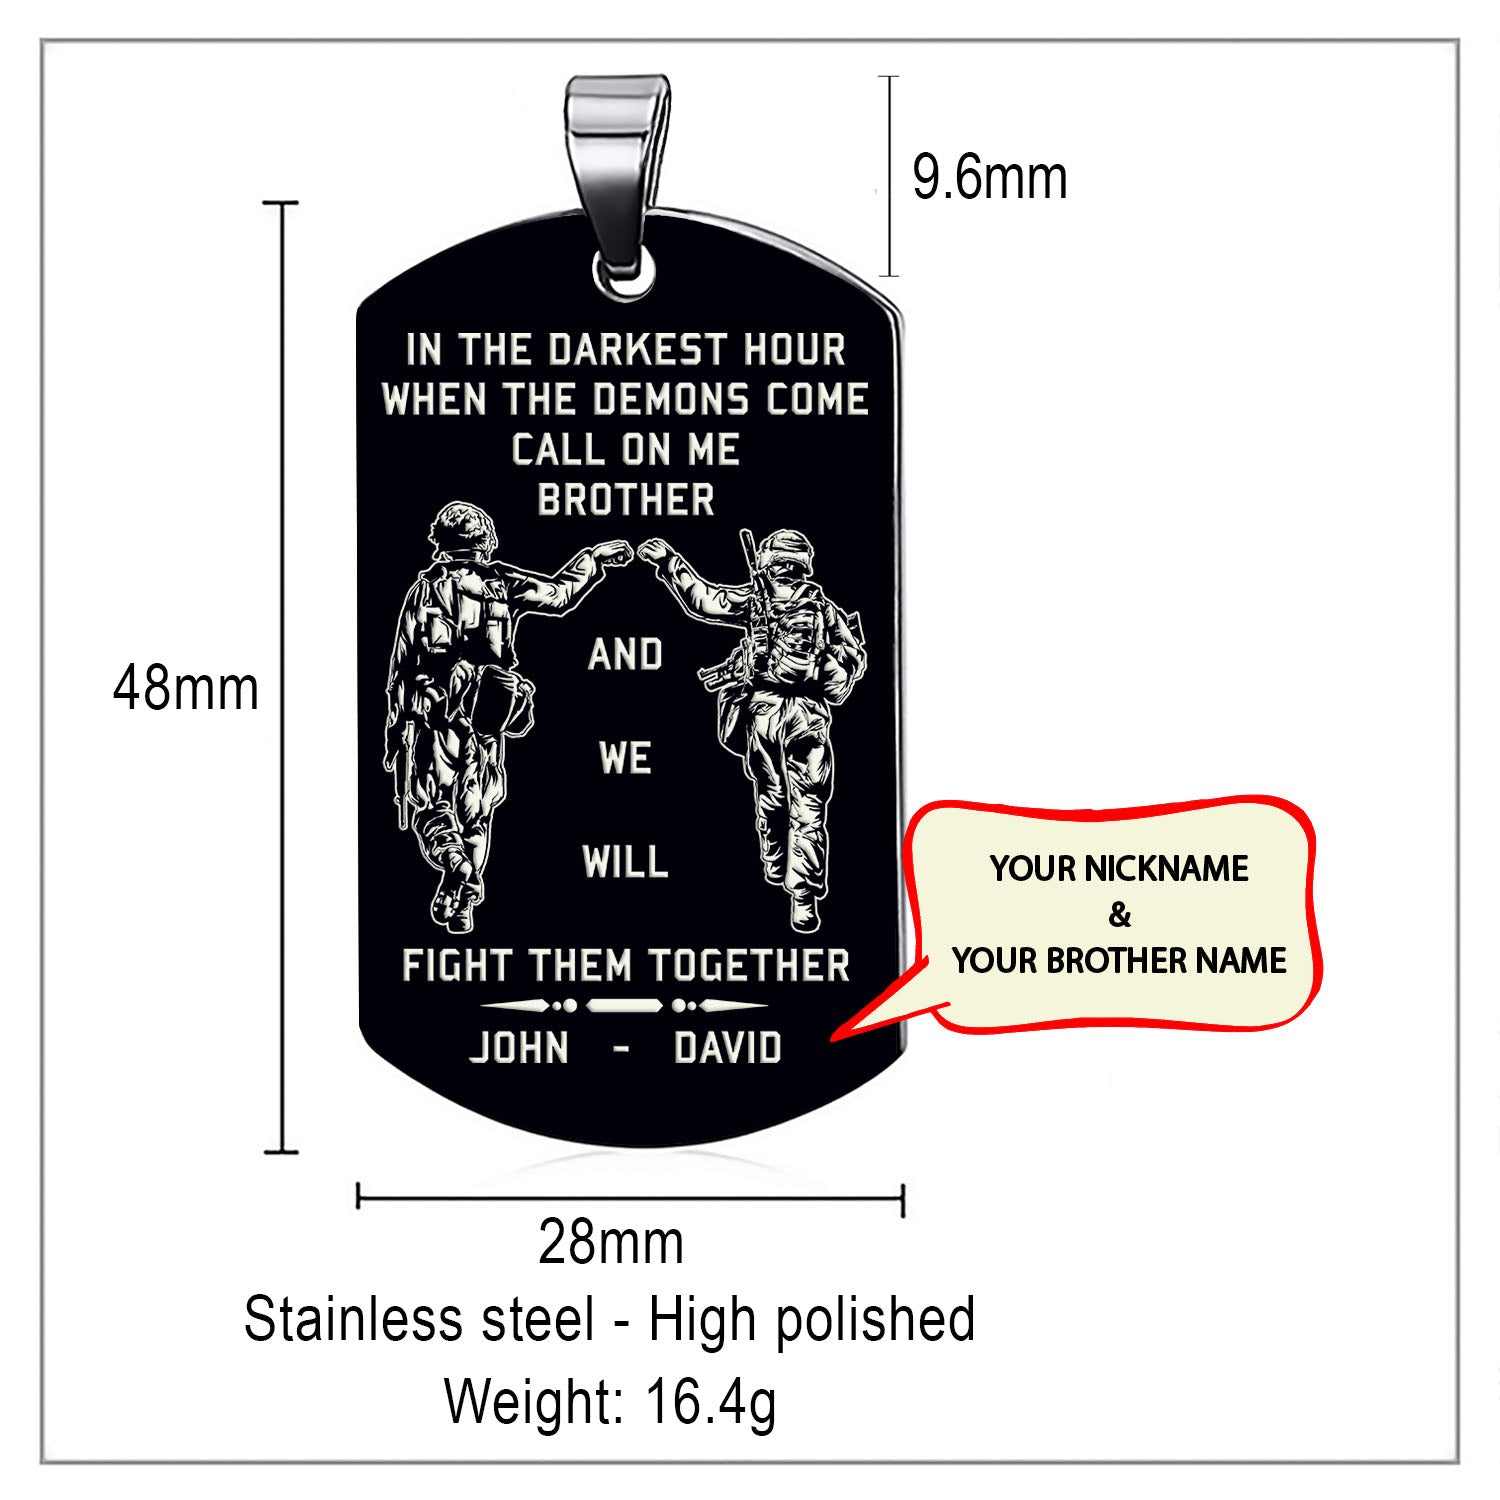 Knights Templar Call on Me Brother Dog Tag Pendant Military Necklace - atsknskgift - atsknskgift